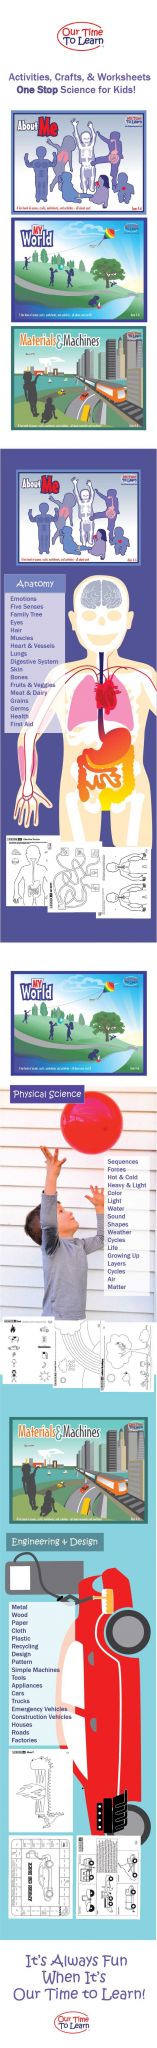 Bill Nye Simple Machines Worksheet together with 41 Best About Me Workbook Images On Pinterest